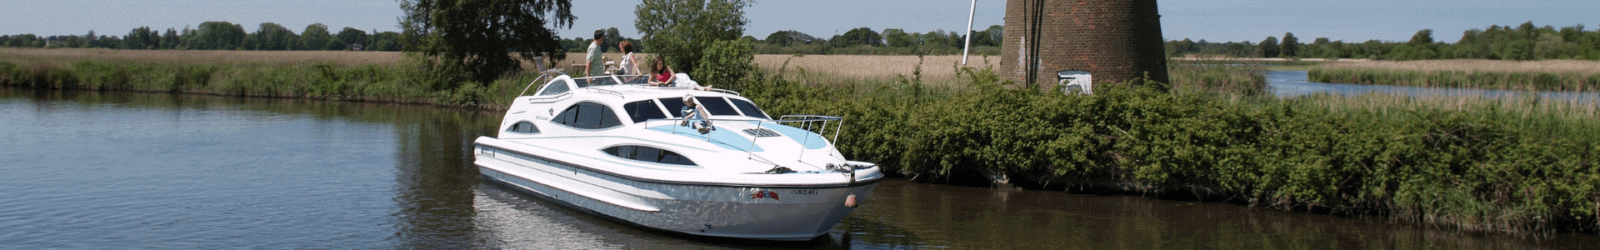 No frills cheap Norfolk Broads Boat Hire from Barnes Brinkcraft based in Wroxham